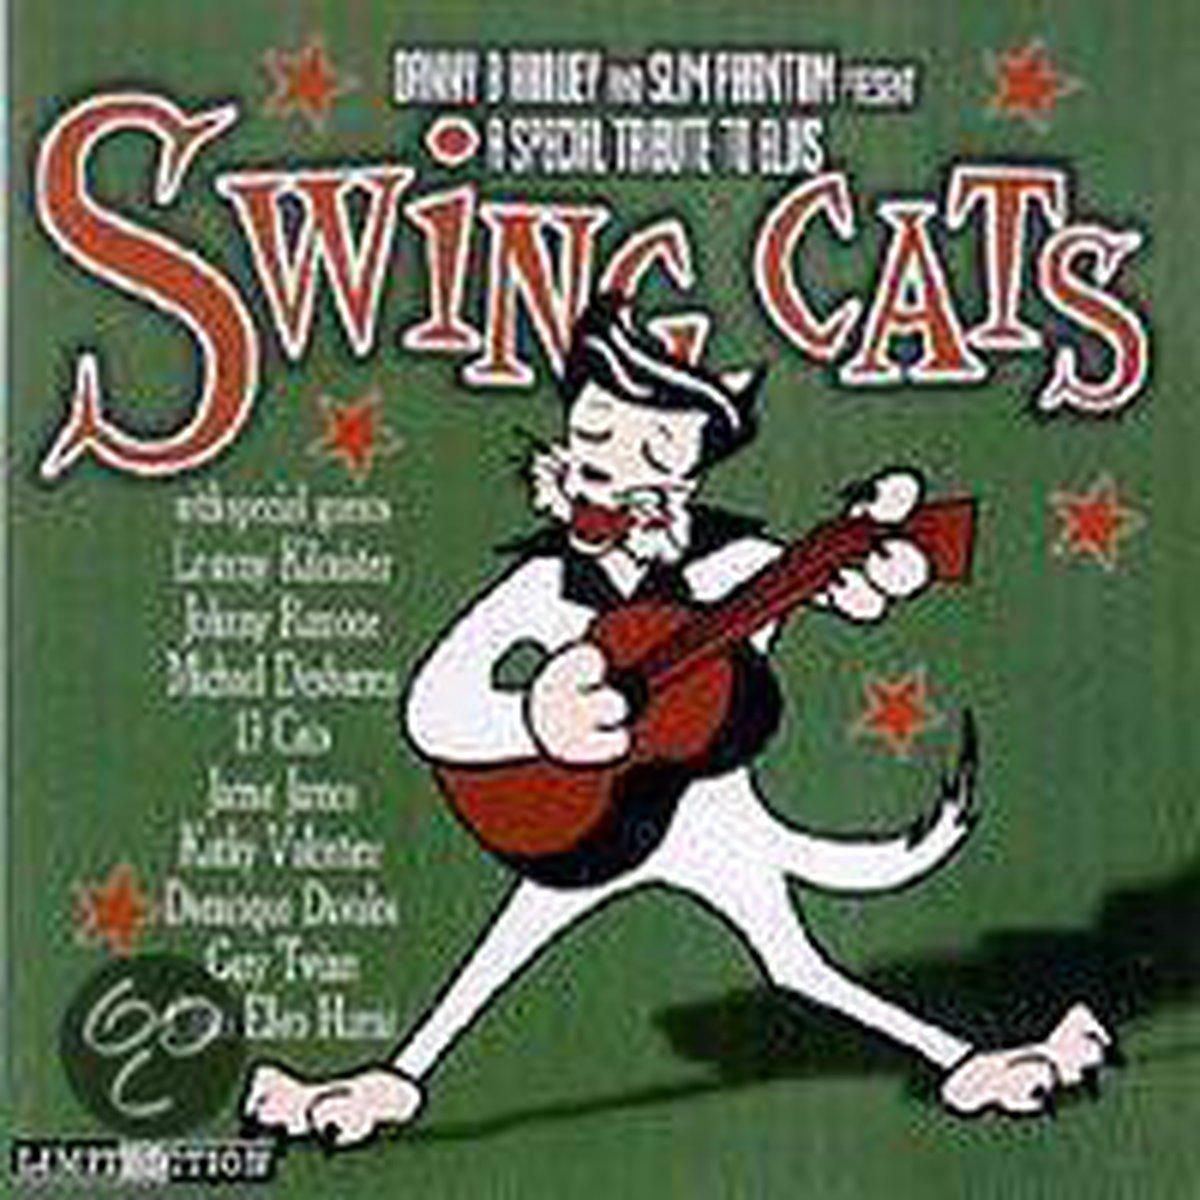 A Special Tribute Elvis - Swing Cats